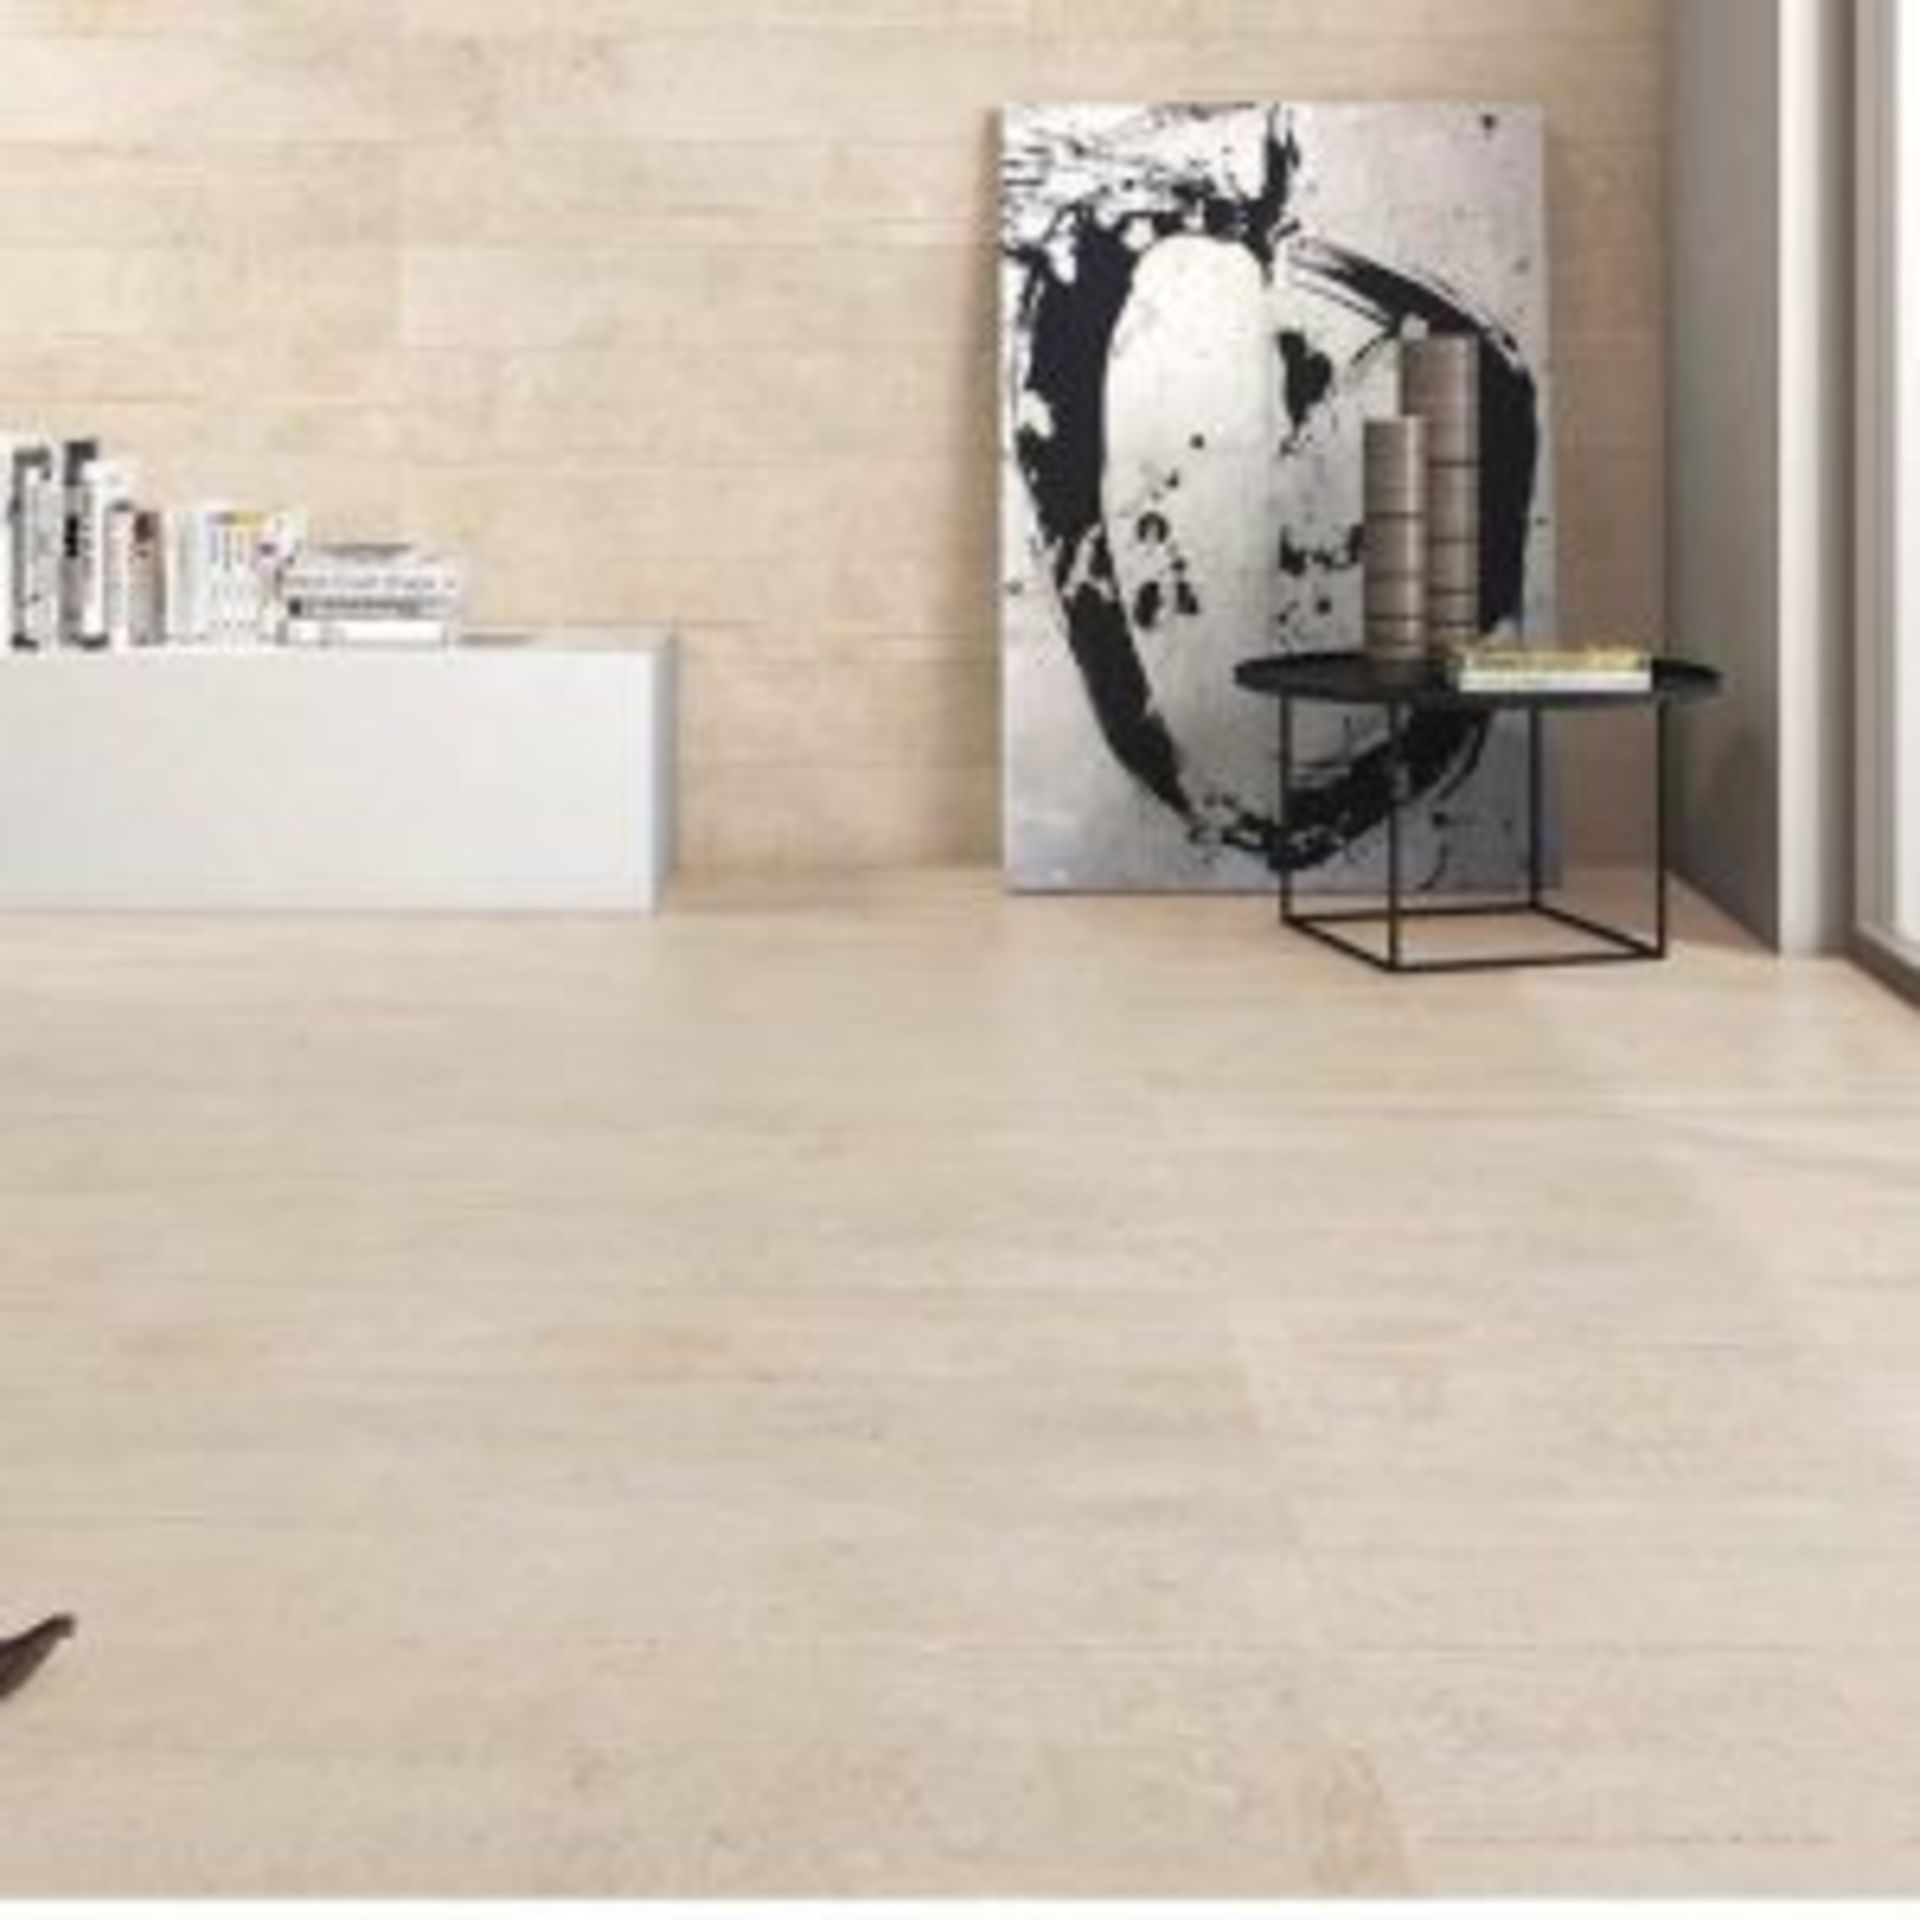 NEW 8.6M2 Veinstone Beige Polished Wall and Floor Tiles. 300x600mm, 1.08m2 per pack. If your lo...